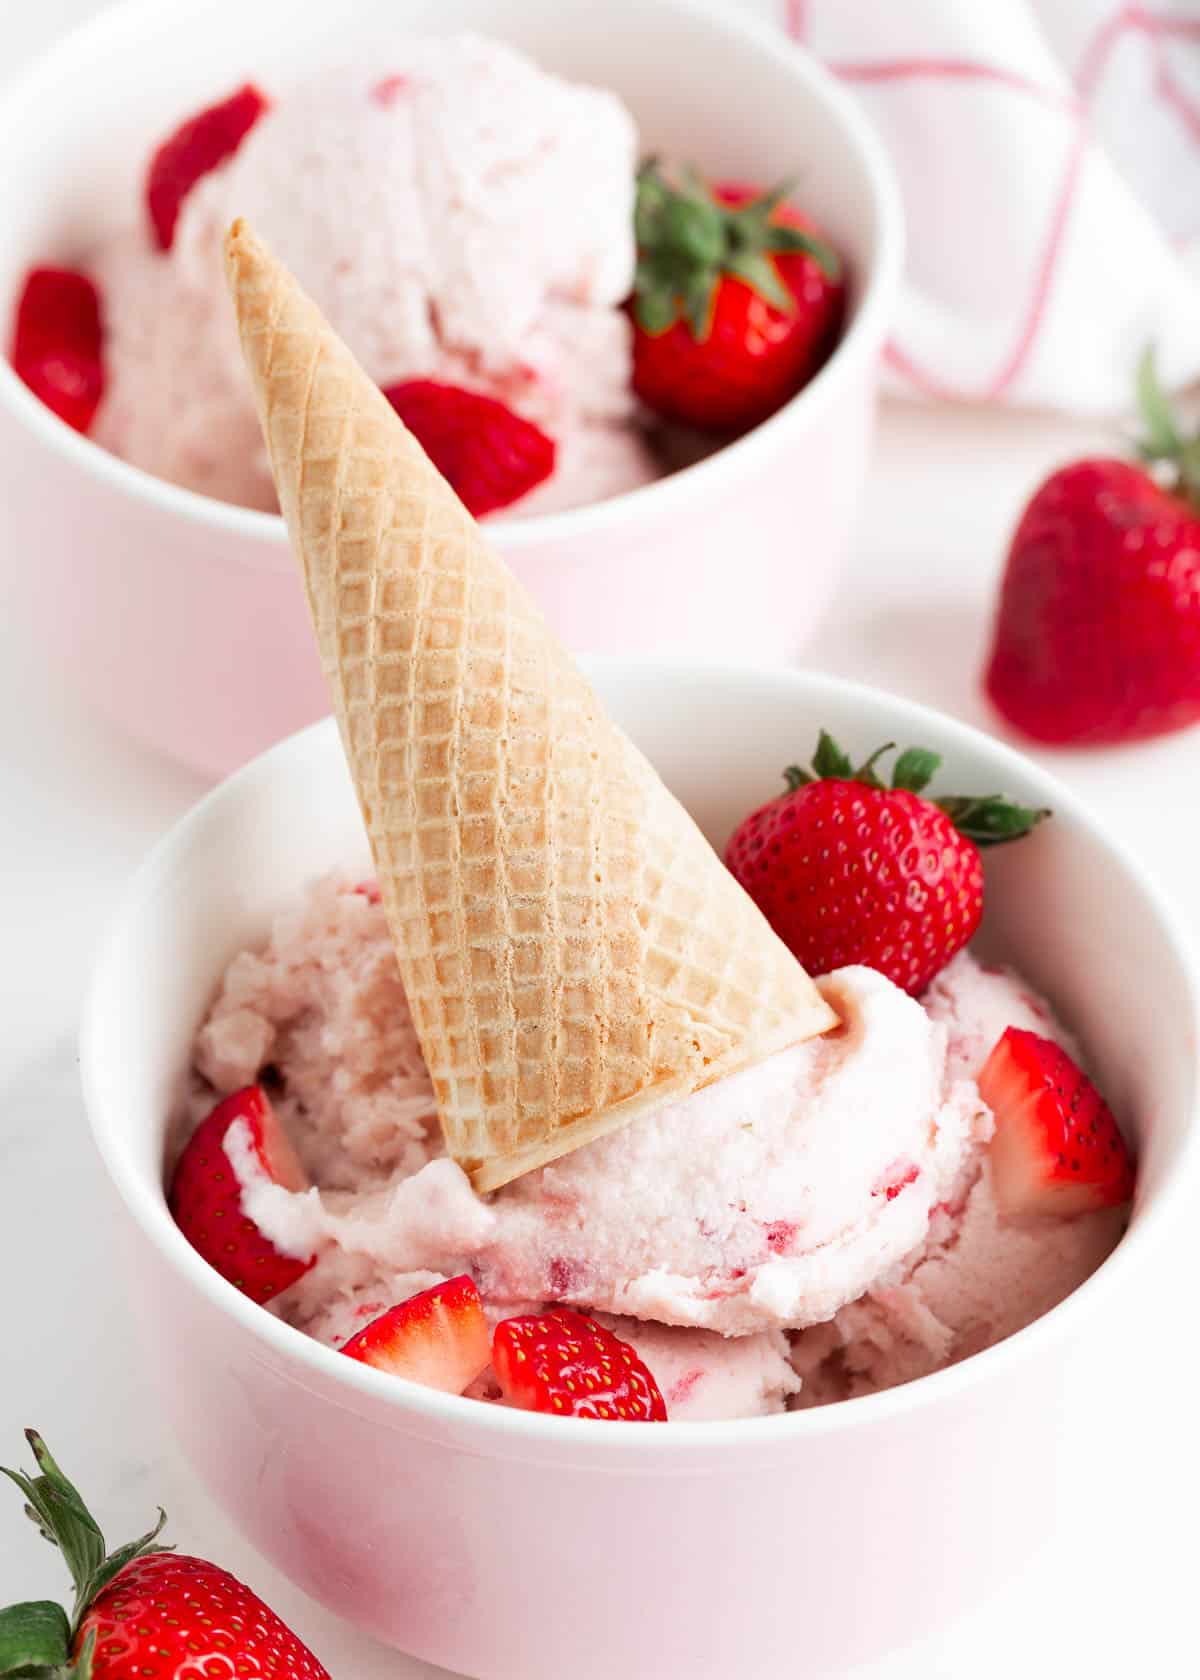 Strawberry ice cream in a bowl with cone.